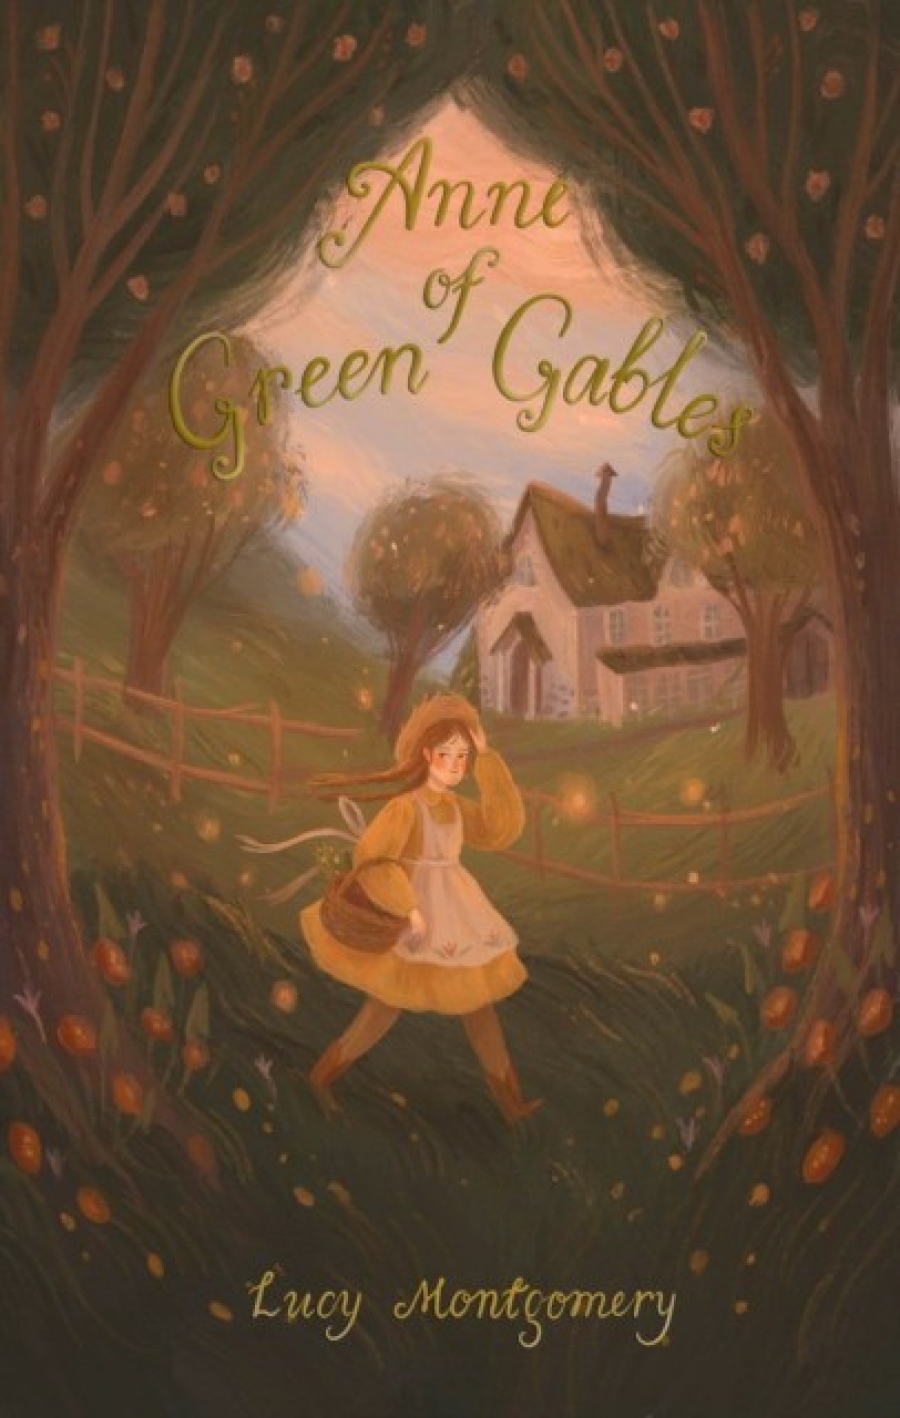 Lucy, Montgomery Anne of green gables 